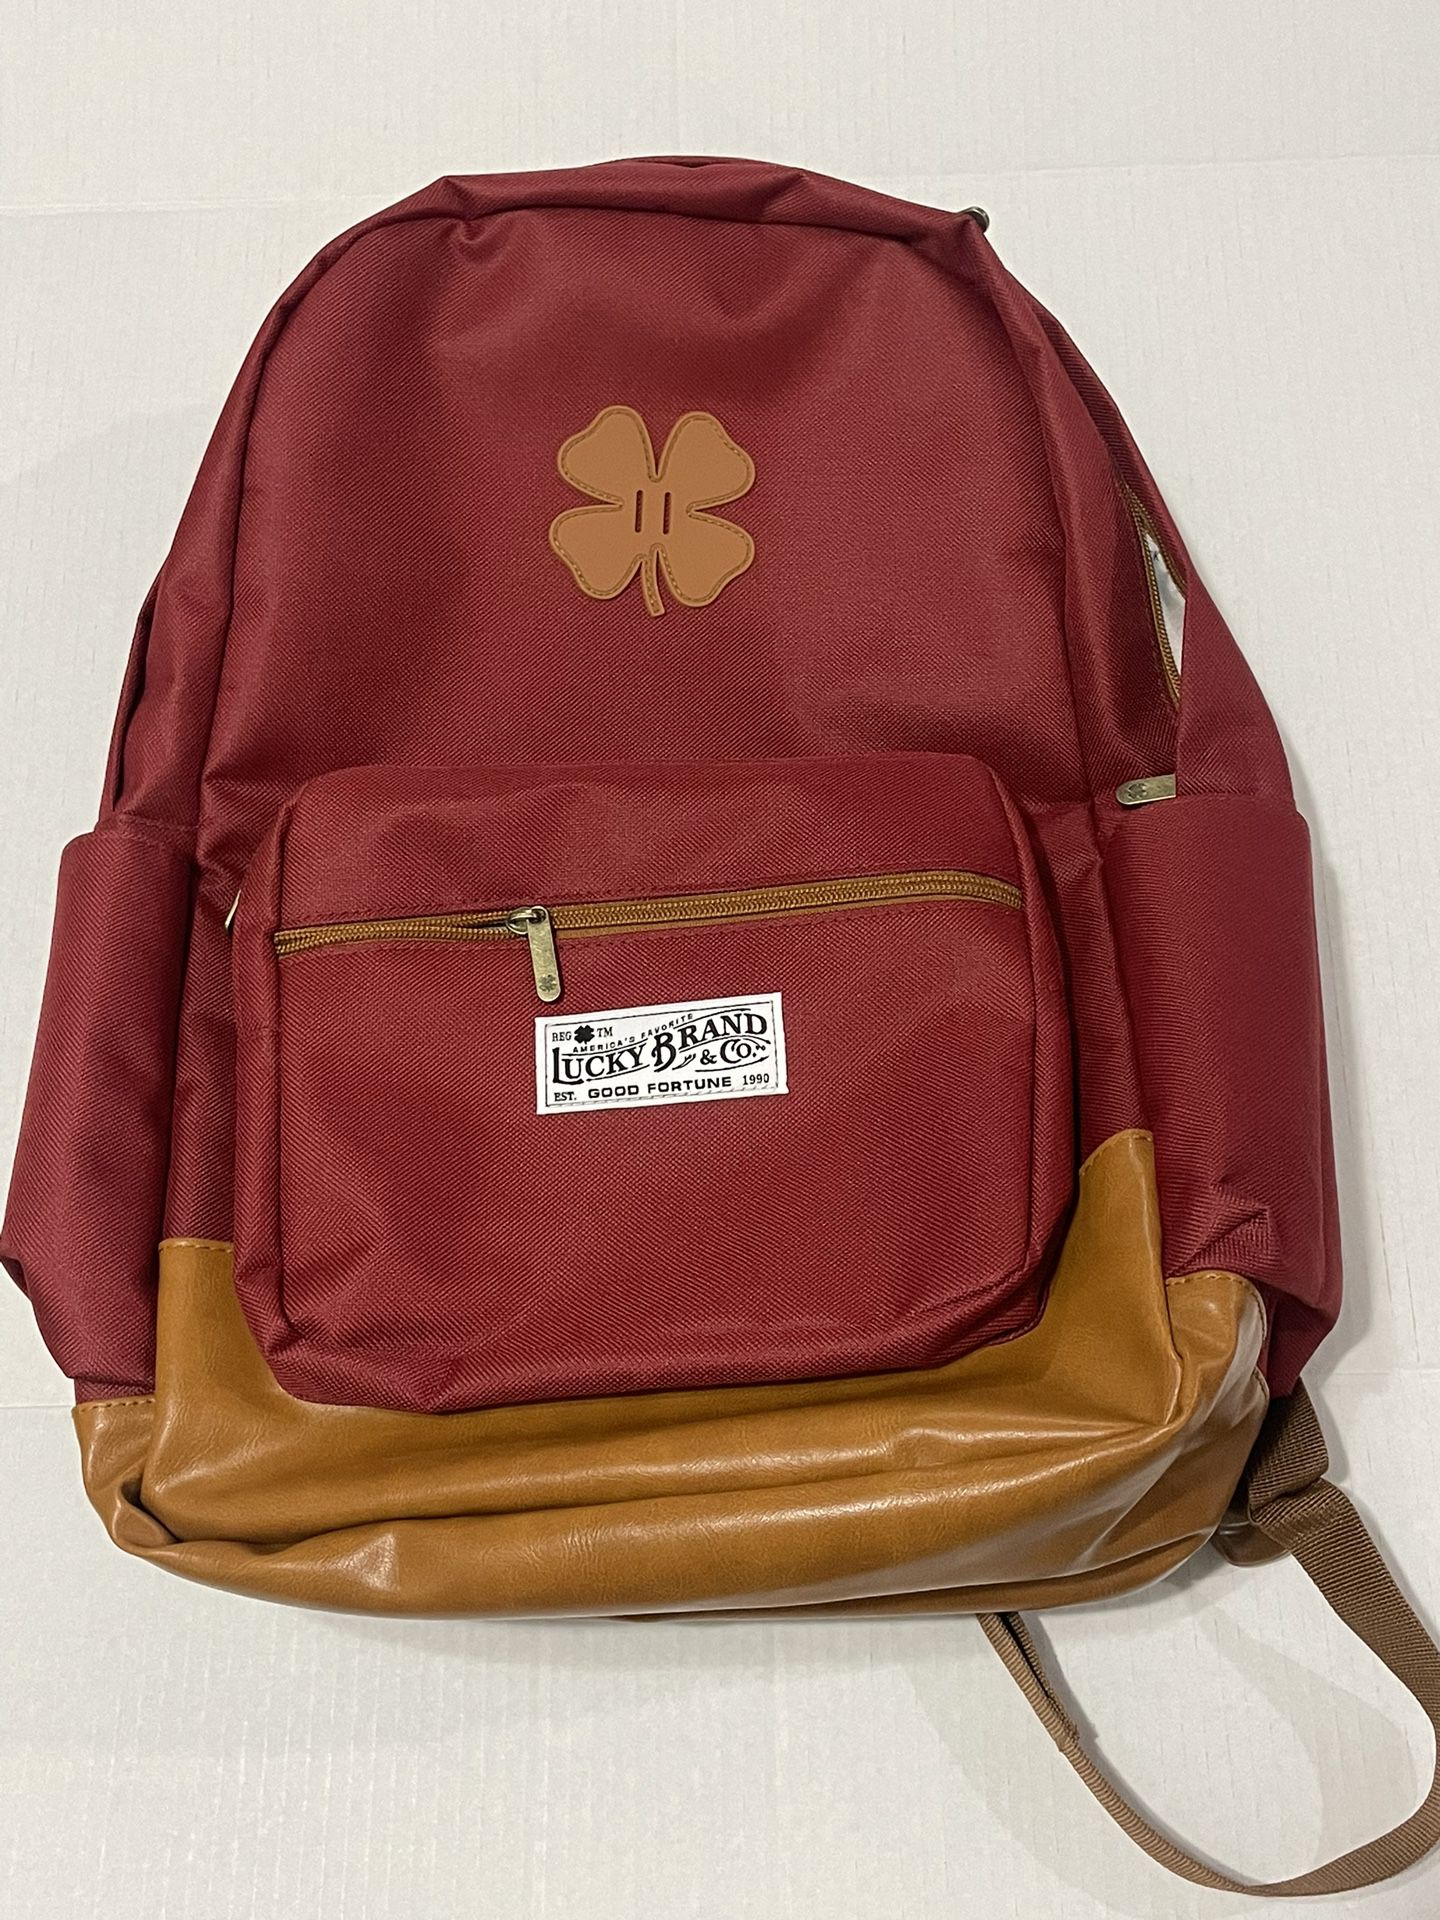 New Lucky Brand Leather Backpack Red Tan 